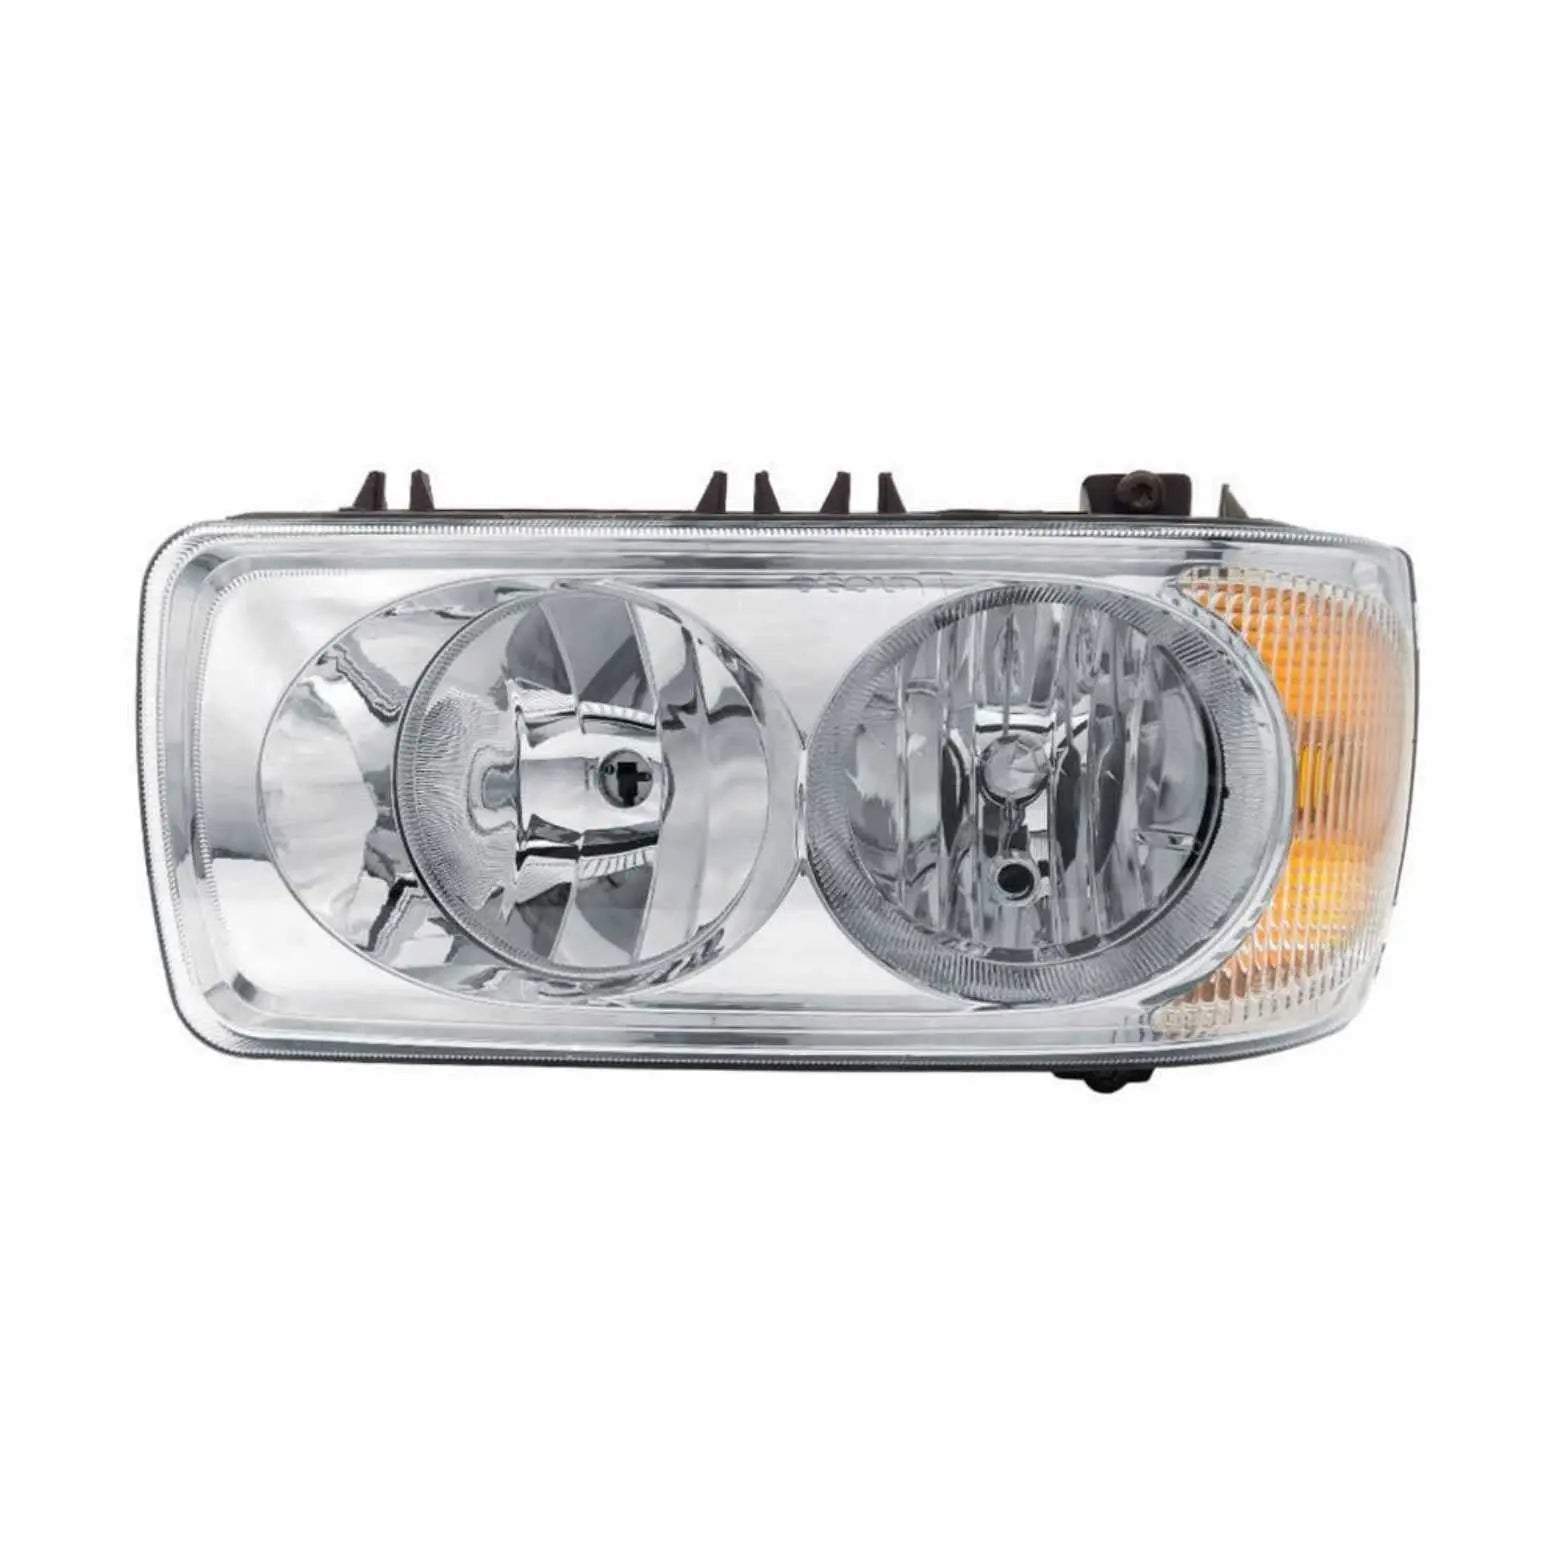 FANCHANTS 1699313 1641742 1962755 1699300 1743684 1399902 HEAD LAMP Manual, LHD, With E Mark, Without Bulb, Right FOR DAF 75/85 CF, CF 65 /IV, CF 75 /IV, CF 85 /IV, XF 95/105